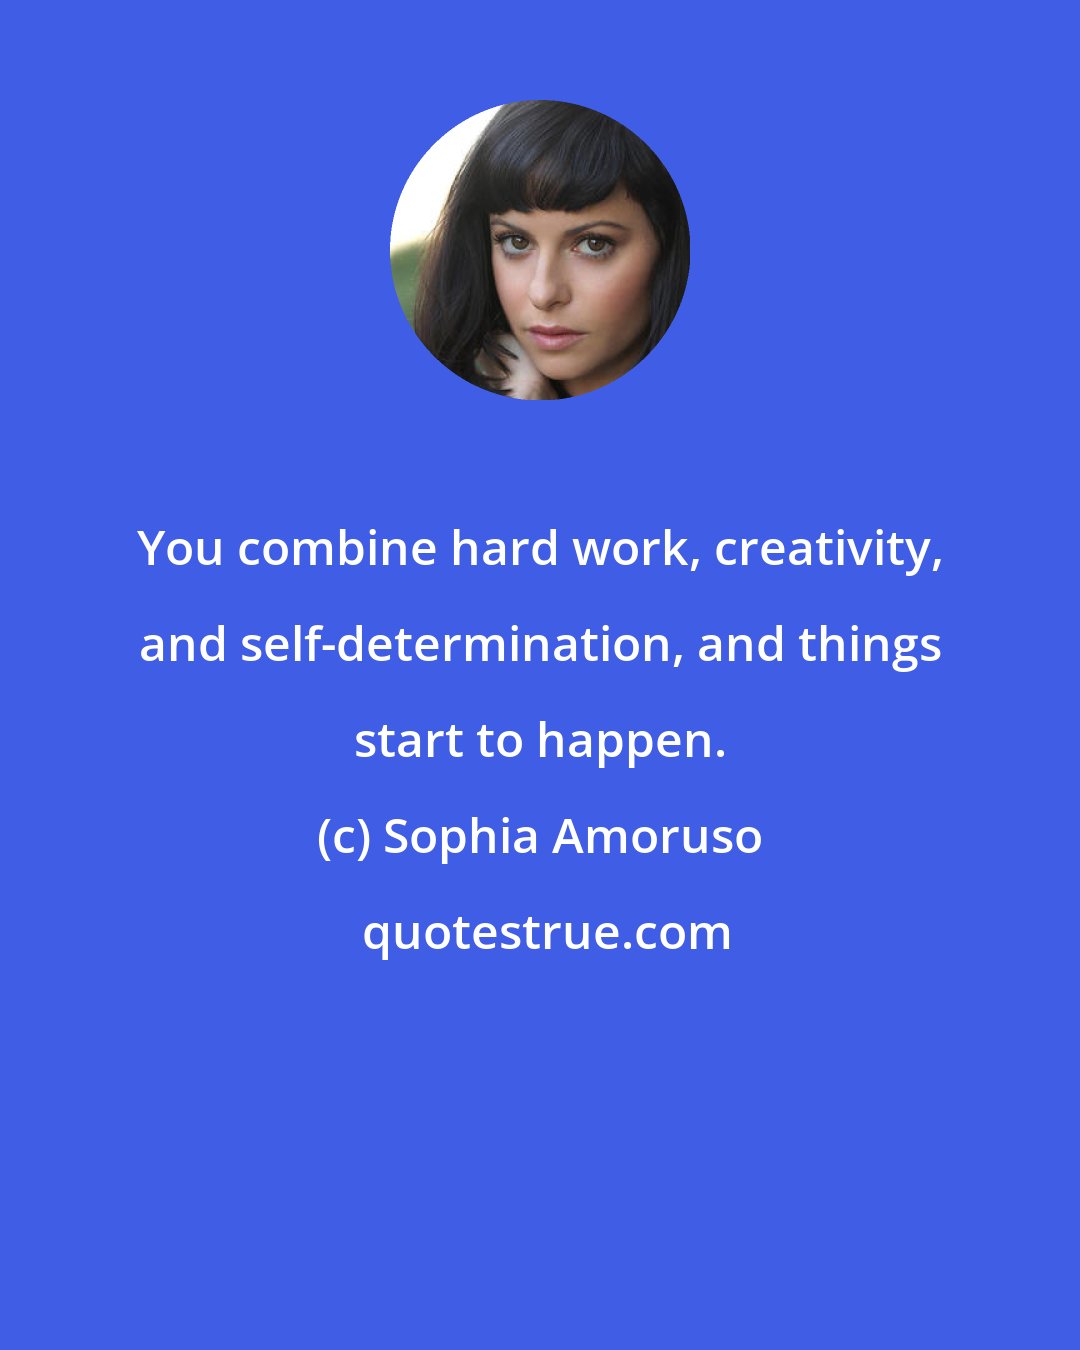 Sophia Amoruso: You combine hard work, creativity, and self-determination, and things start to happen.